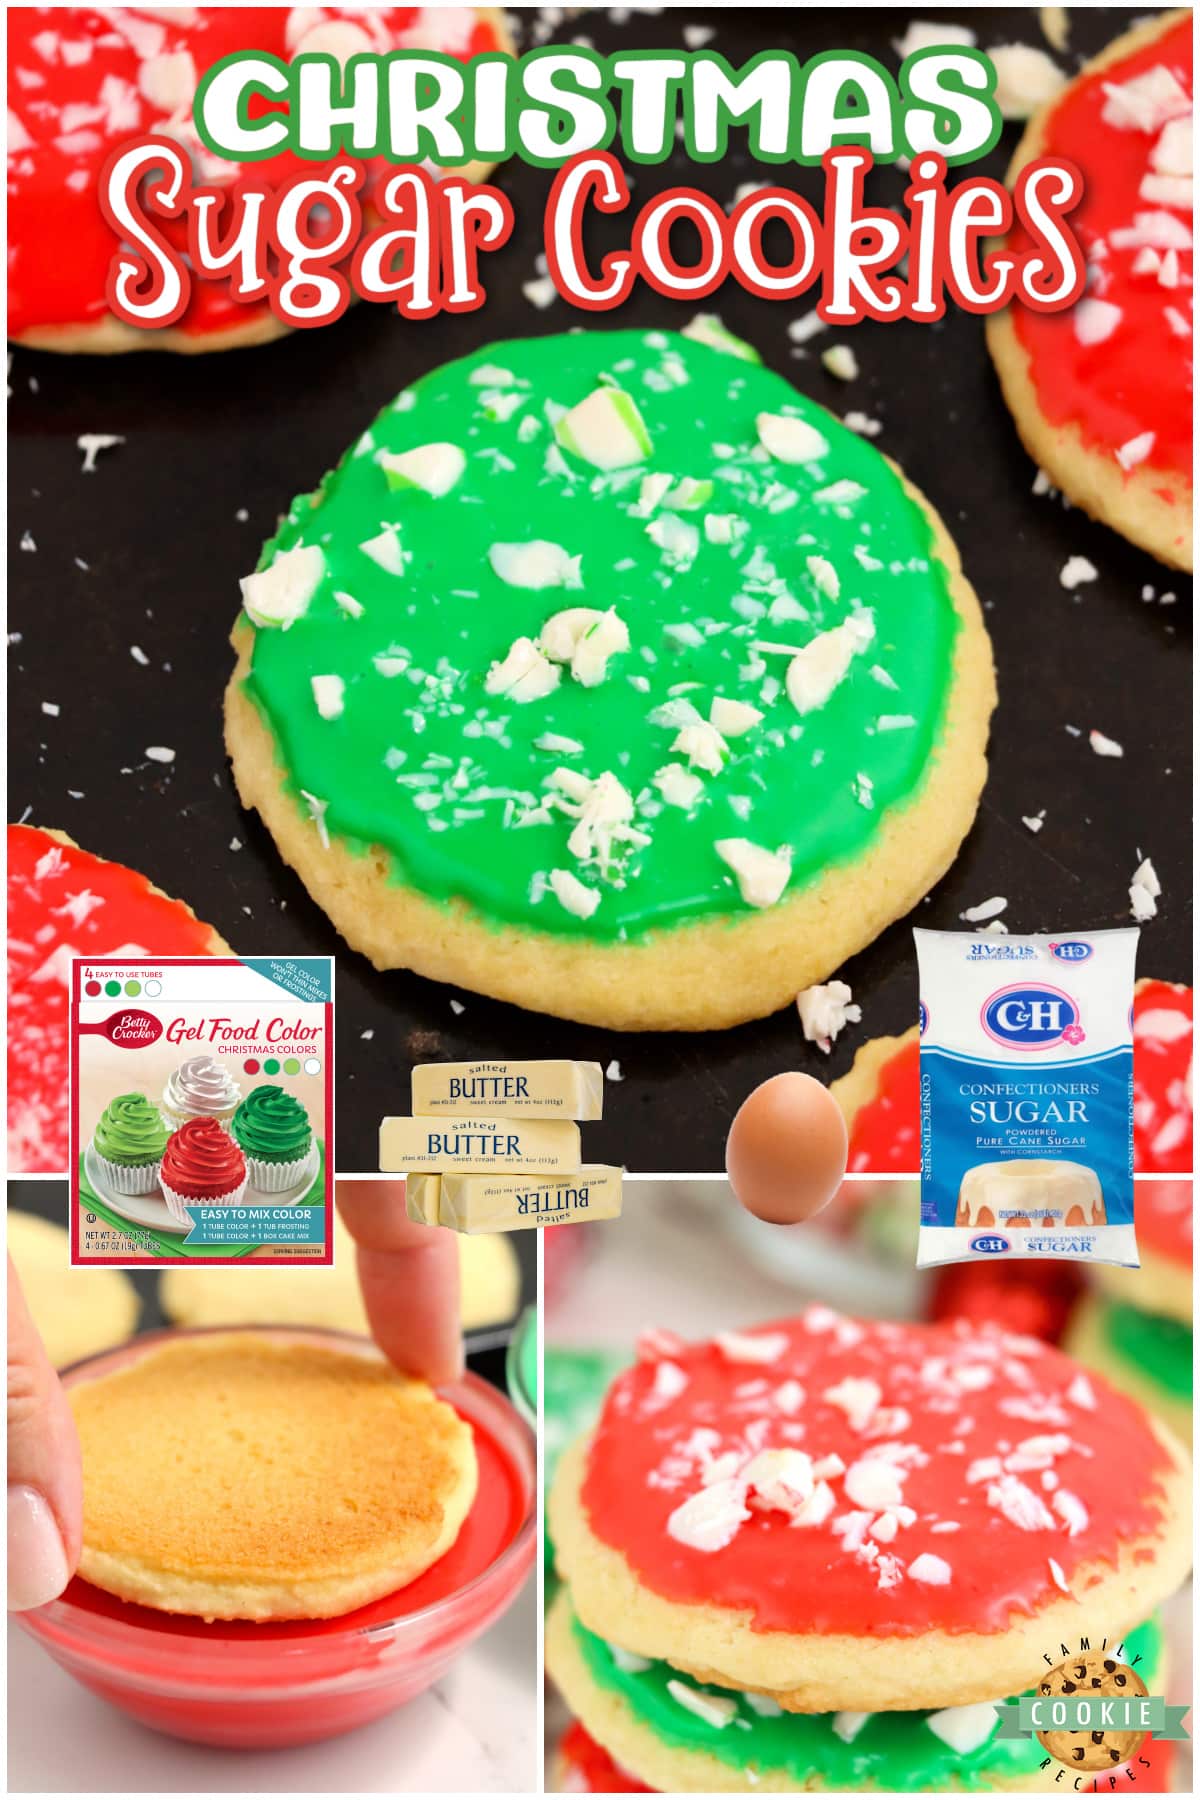 Christmas Sugar Cookies are soft and light sugar cookies dipped in vibrant frosting and topped with crushed mints. Easy holiday sugar cookie recipe that is perfect for parties and goody platters. No chilling, rolling out the dough or cutting out any cookies!